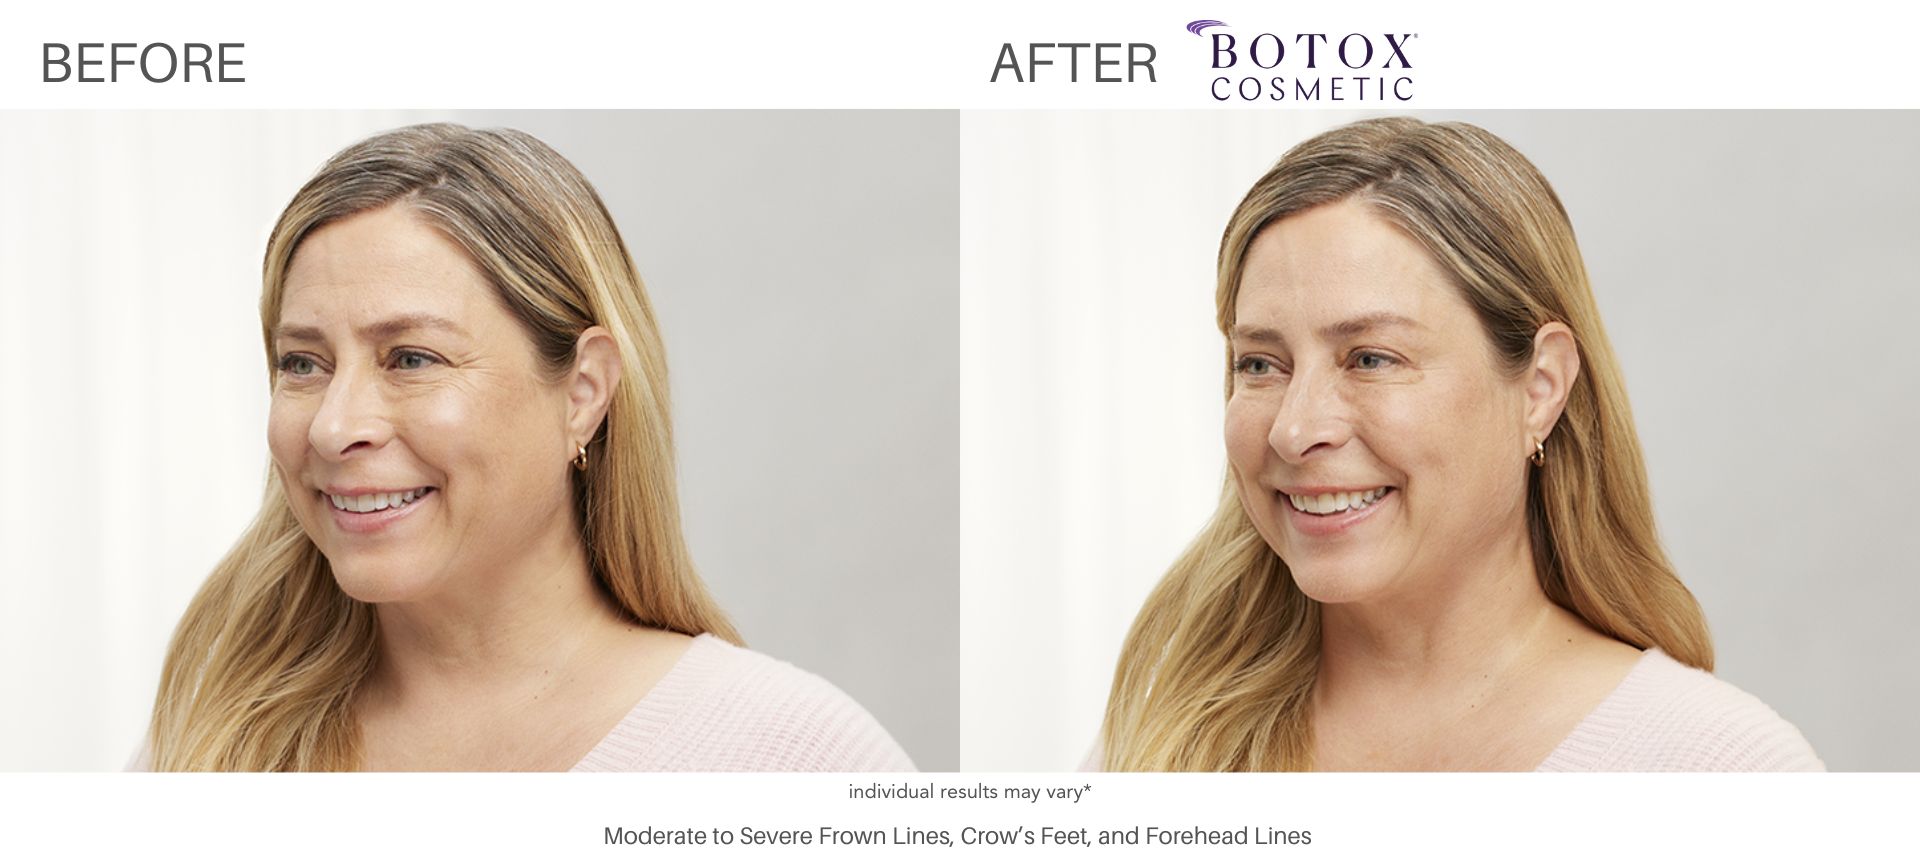 Before and after images are what a website needs attract more patients.